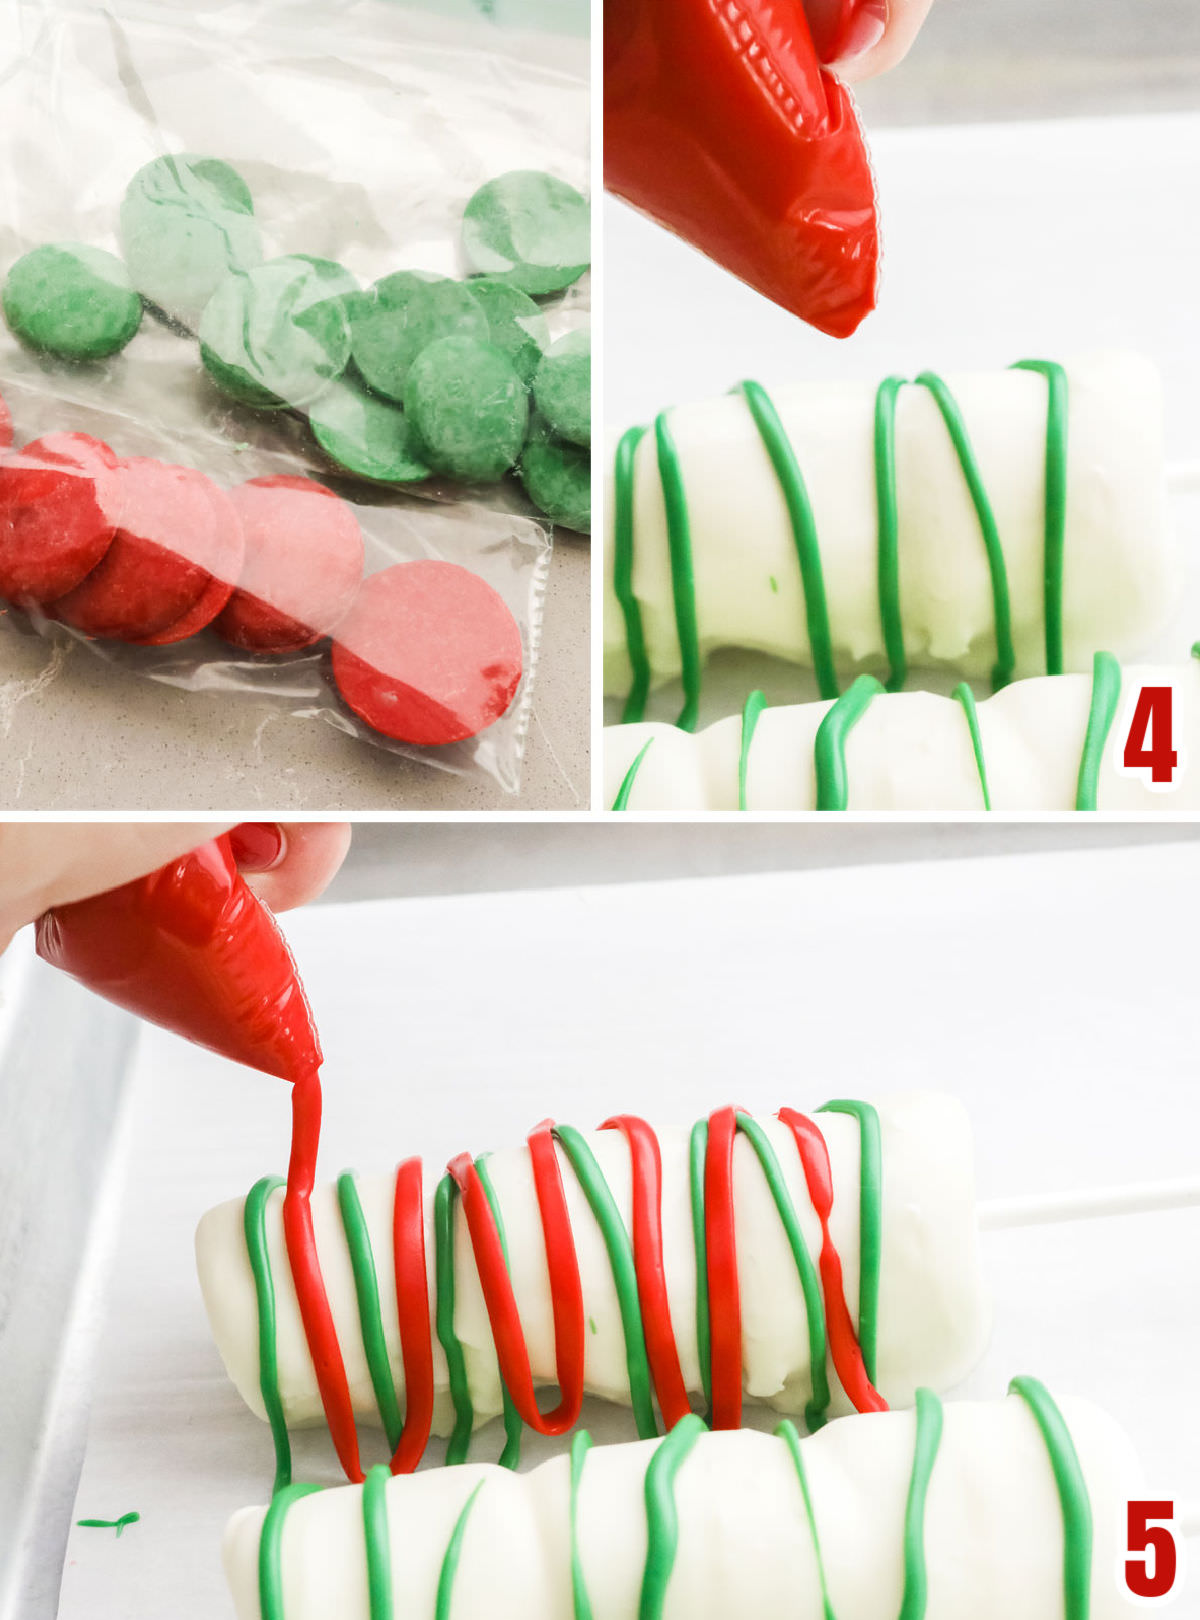 Collage image showing the steps for adding decorative drizzles of candy melts on the marshmallow pops.